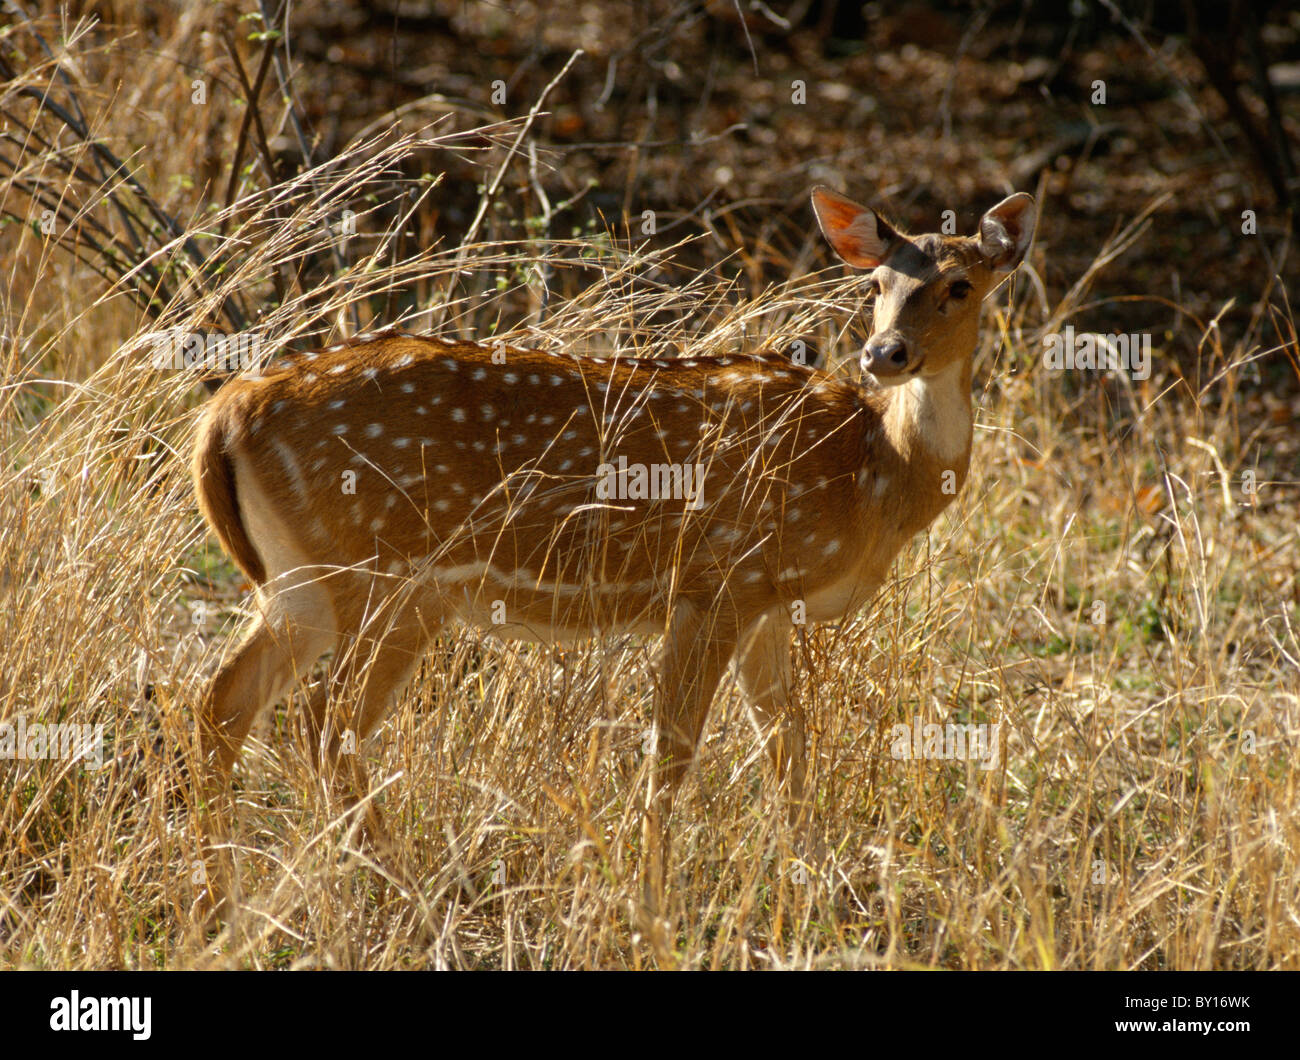 Axis-Dear, Ranthambhore National Park, Rajasthan, Inde Banque D'Images